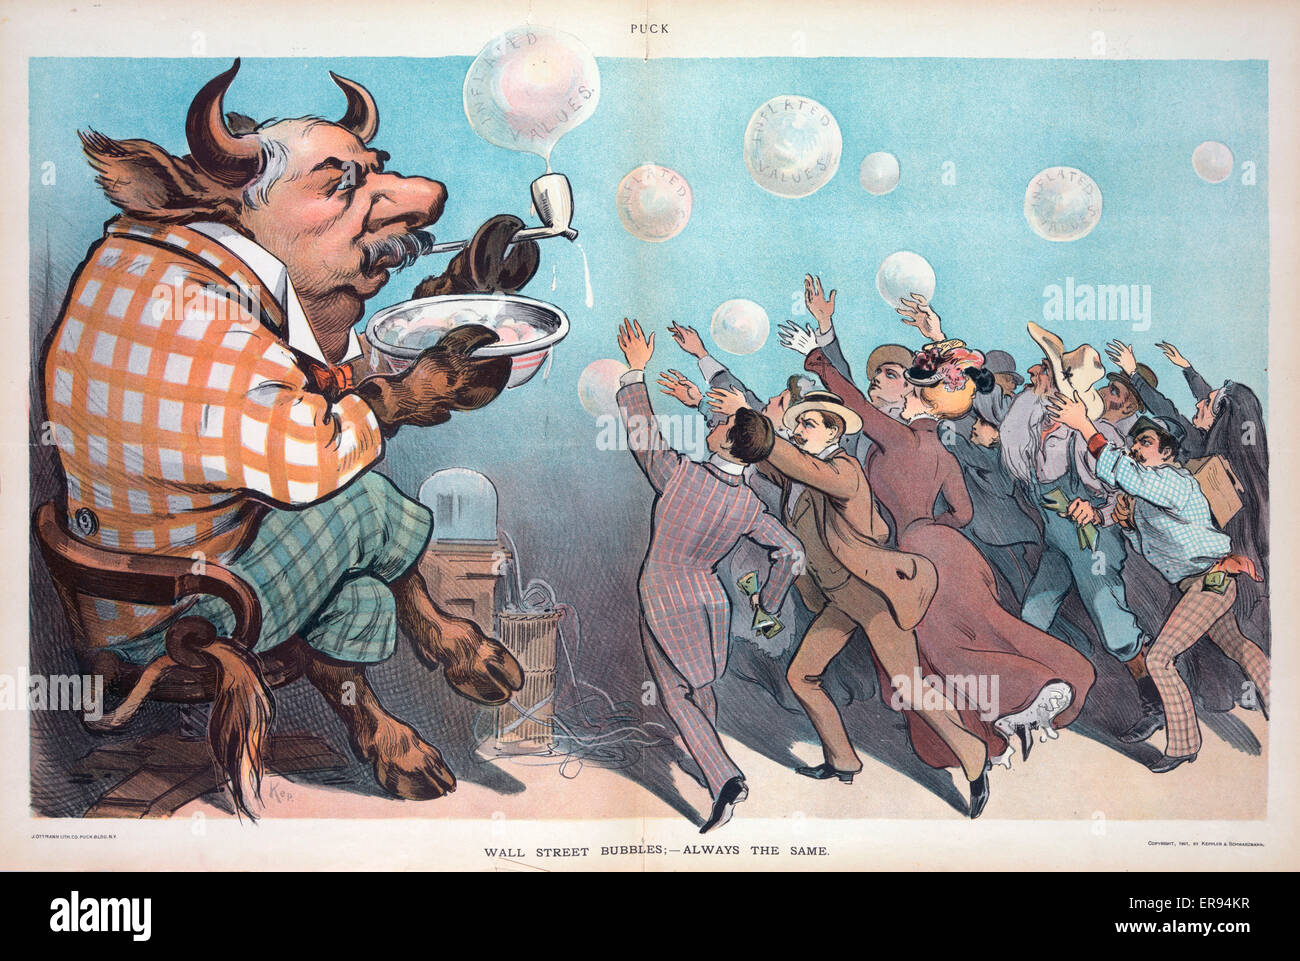 Wall street bubbles; - always the same Stock Photo